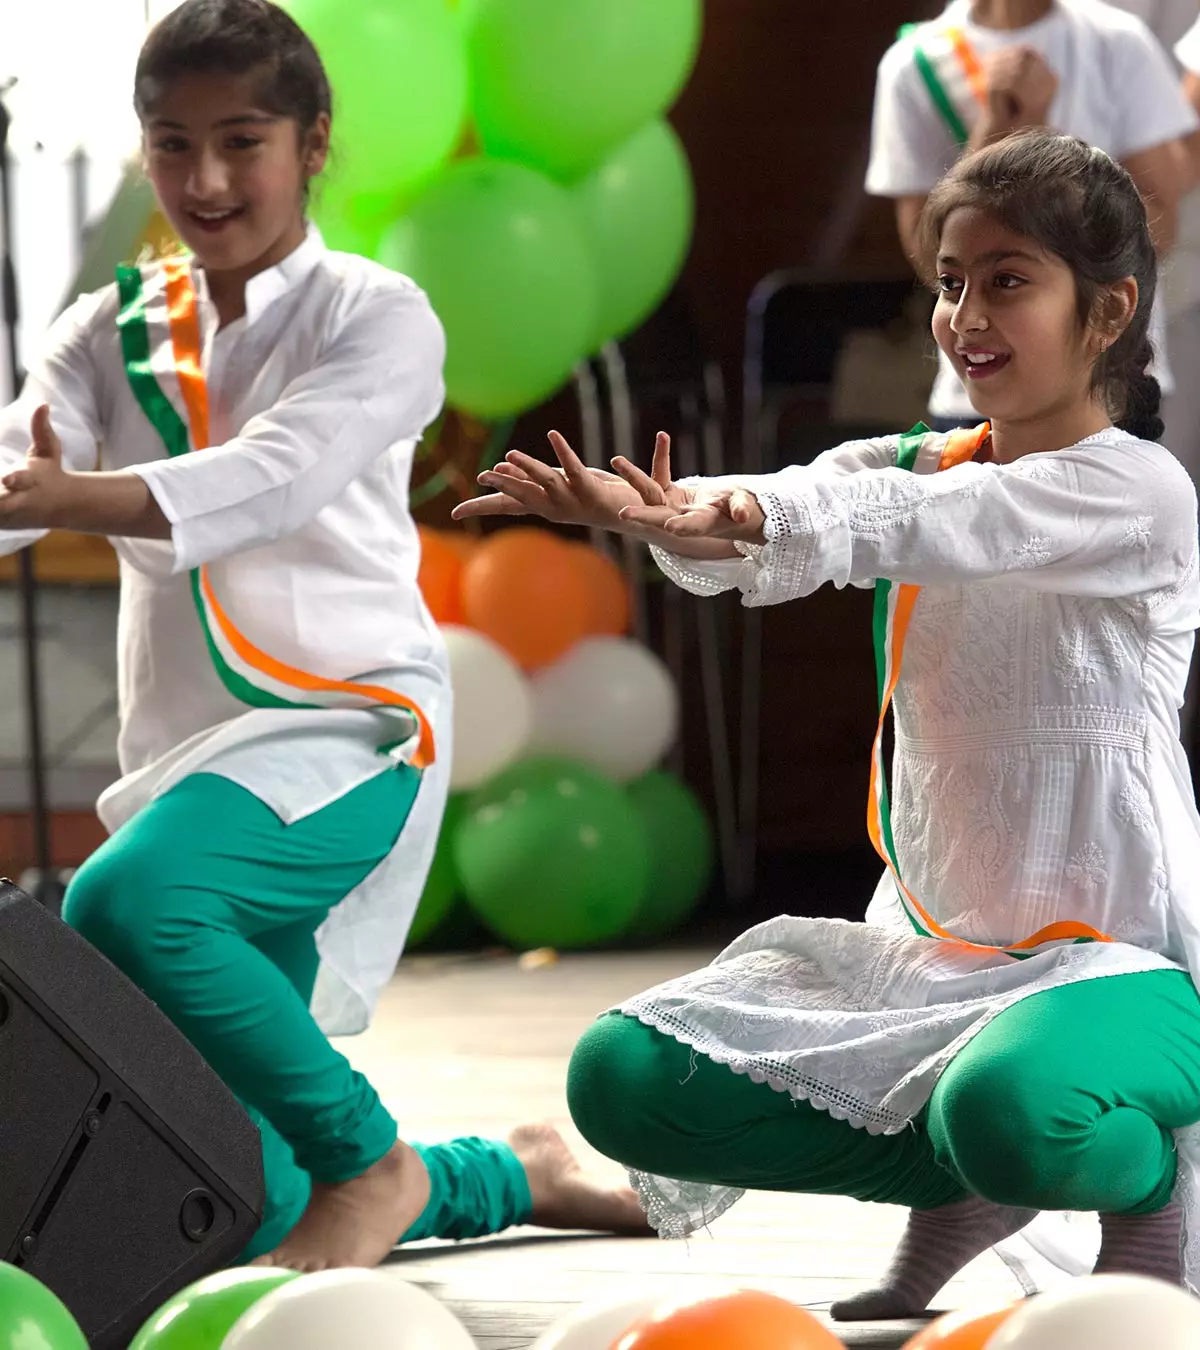 Games and activities are the best ways to instill the spirit of Independence Day in children.